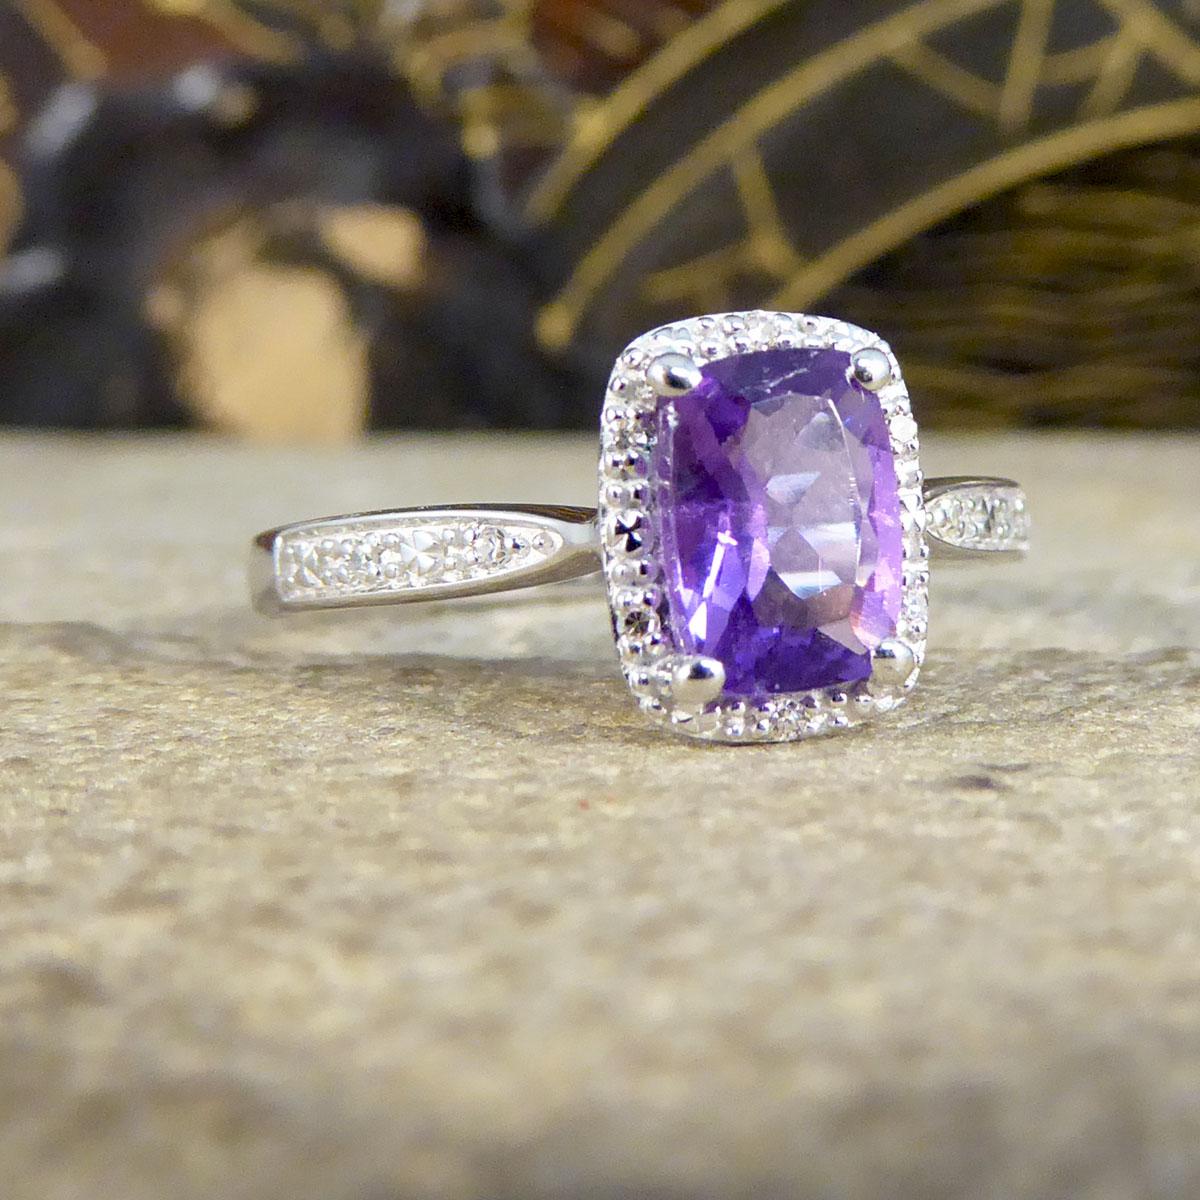 This contemporary ring features a single Amethyst gemstone with a bright purple colouring in a four claw setting. The beautifully mesmerising Amethyst is surrounded by an illusion halo with 6 small diamonds one at the top and bottom and two either